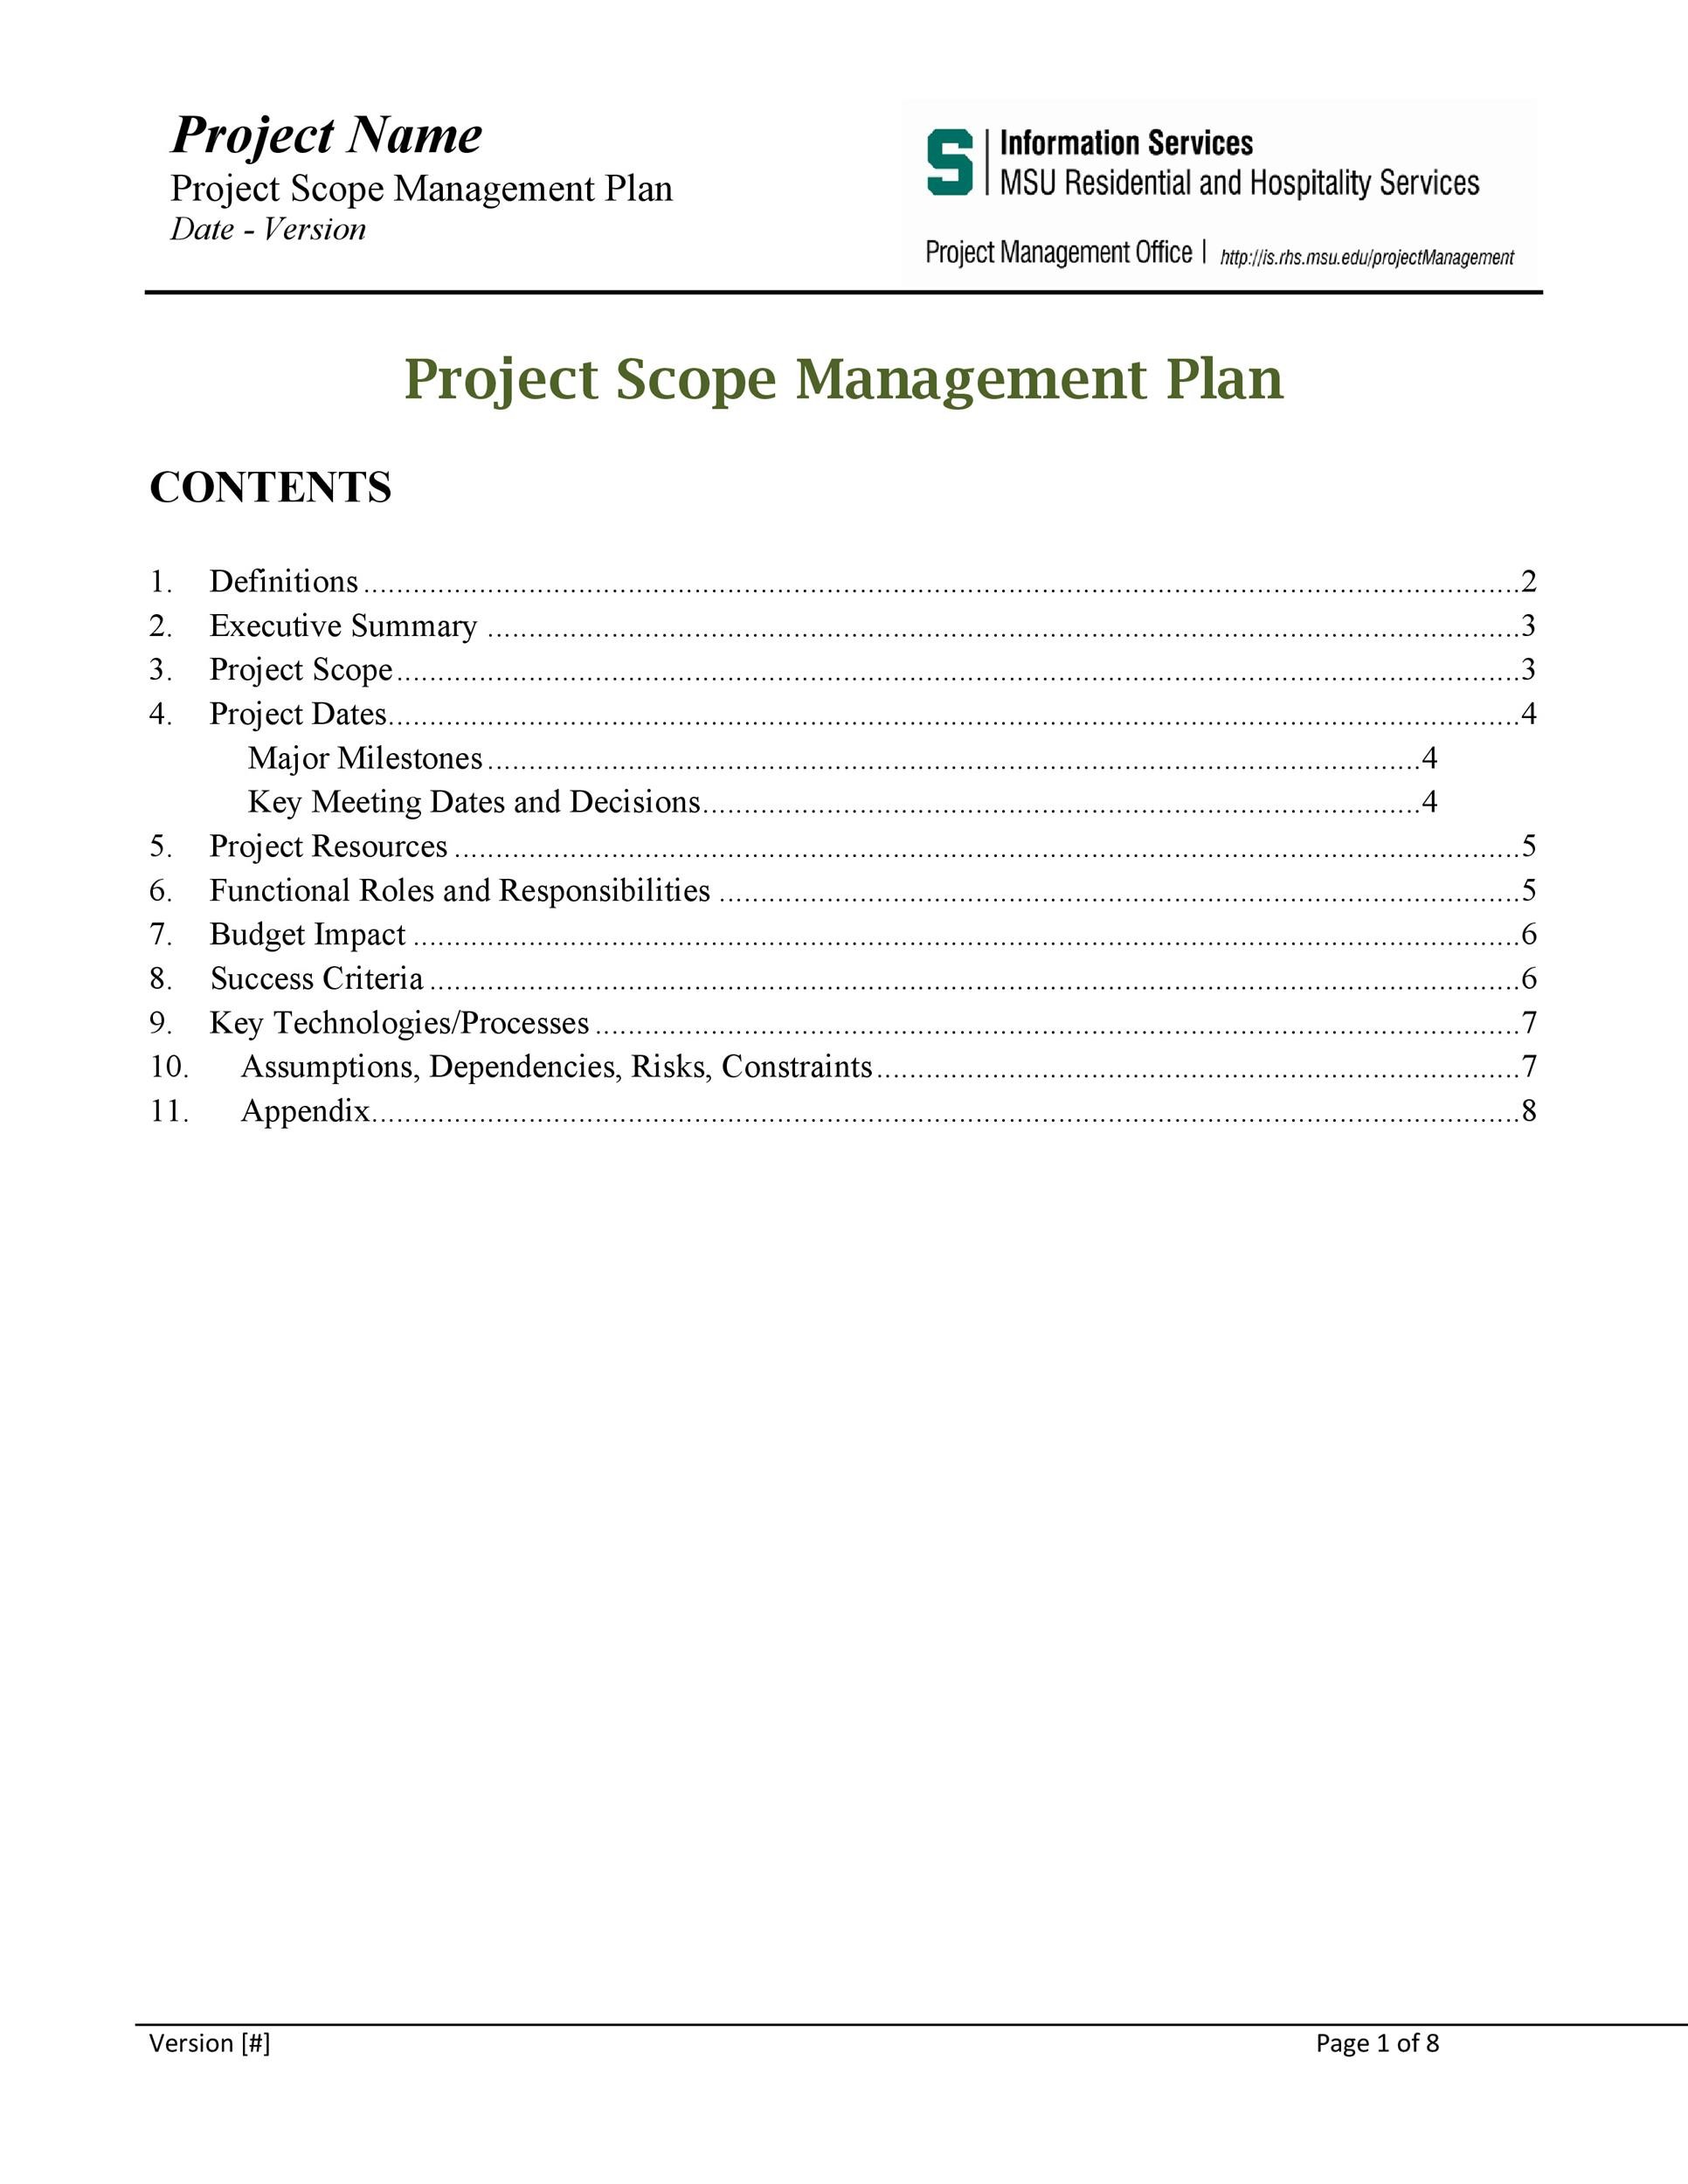 research project scope template